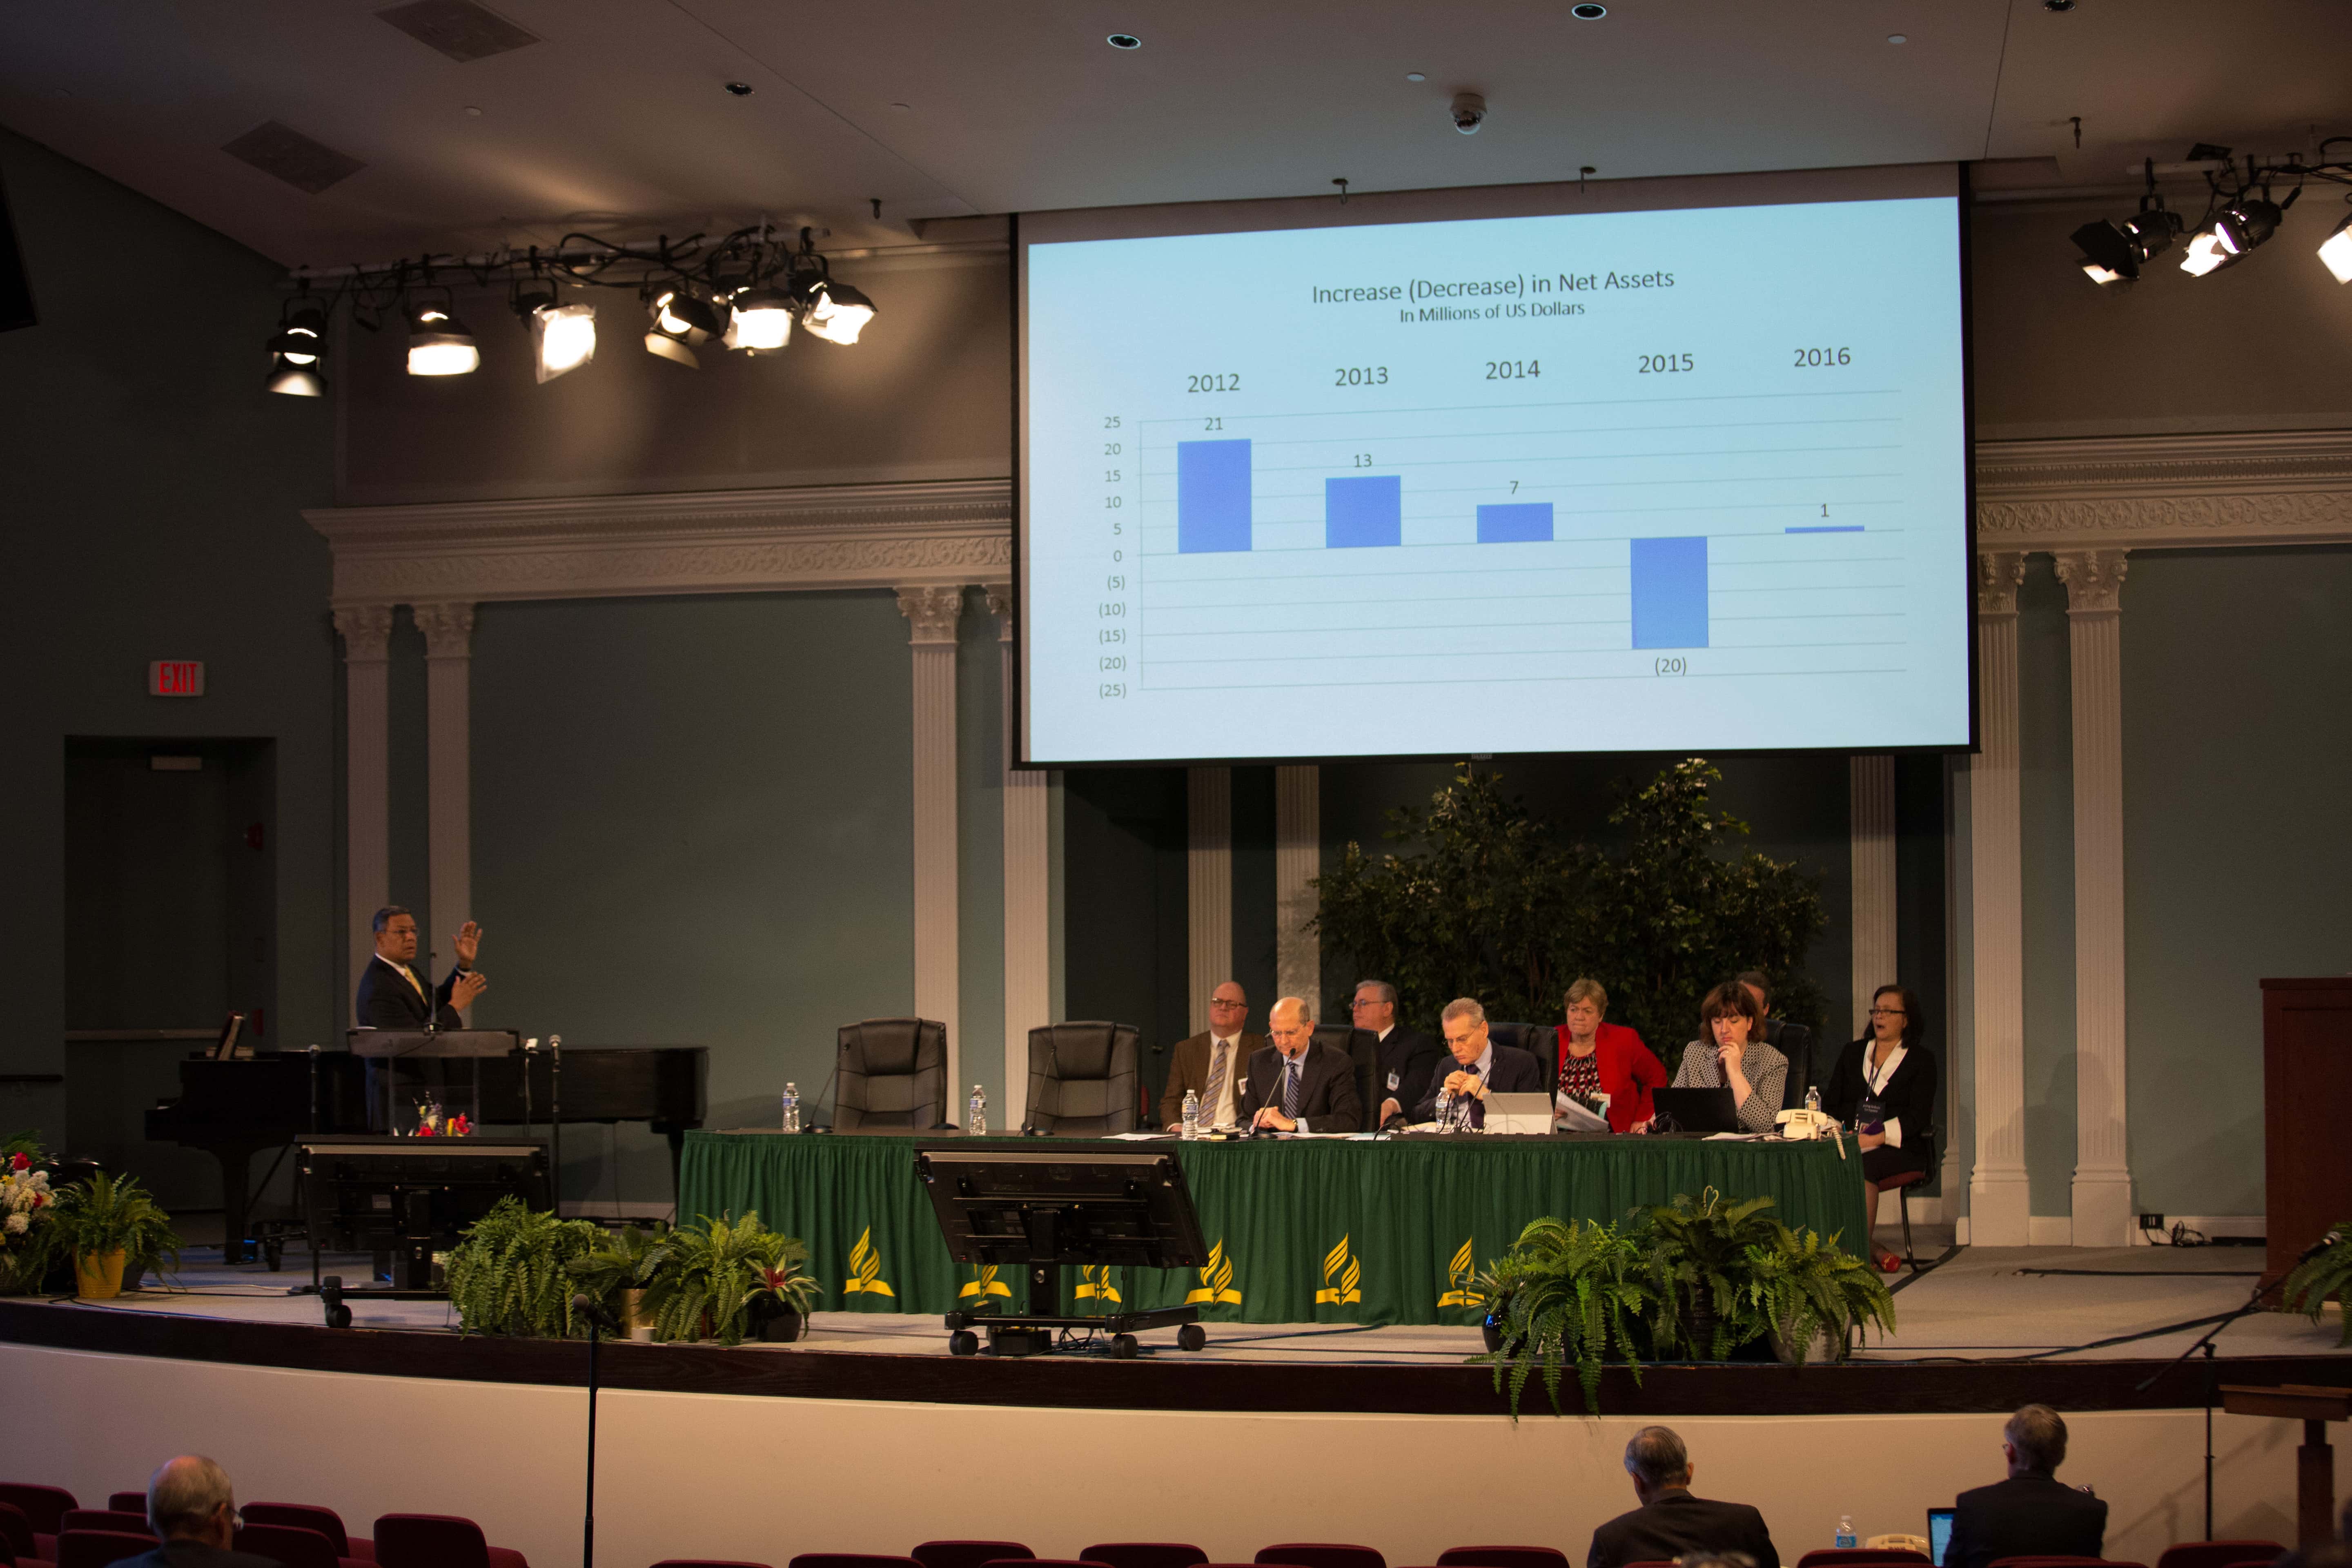 Juan Prestol-Puesán, Seventh-day Adventist church treasurer, shows the turnaround in net assets of the church during 2016 at the 2017 Spring Meeting in Silver Spring, Maryland. [Photo credit: Brent Hardinge / ANN]